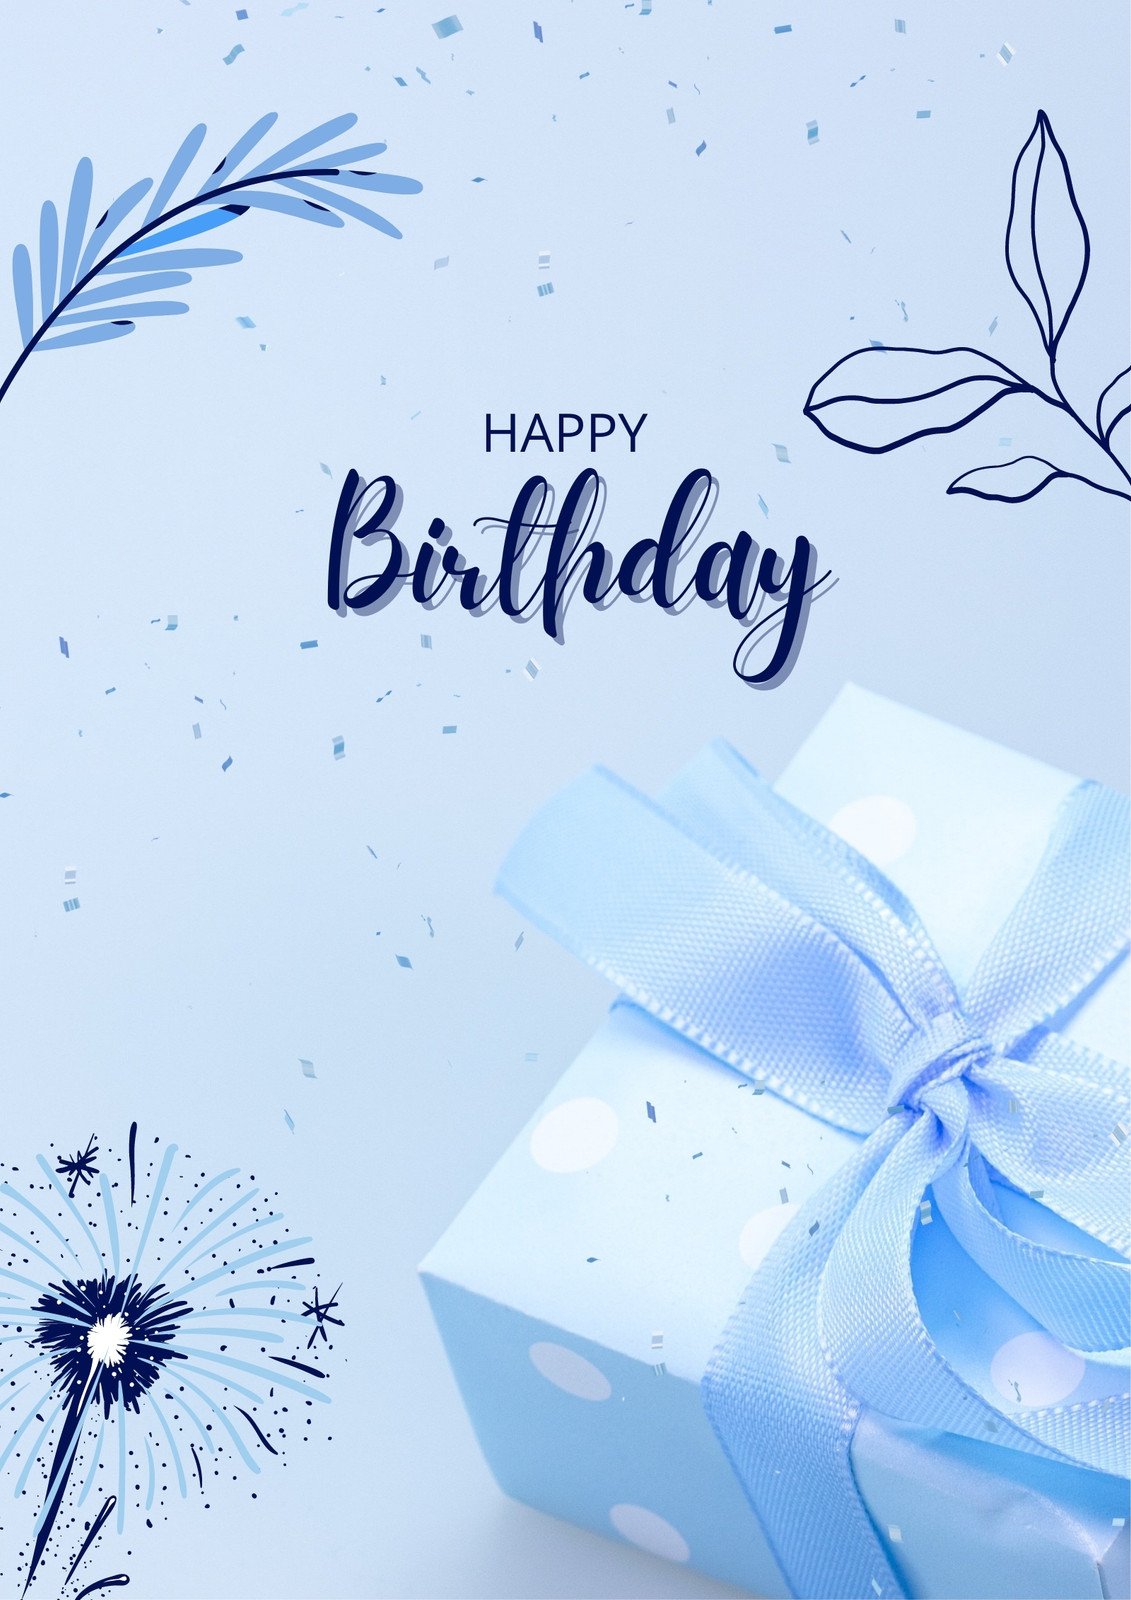 Free and customizable happy birthday background templates